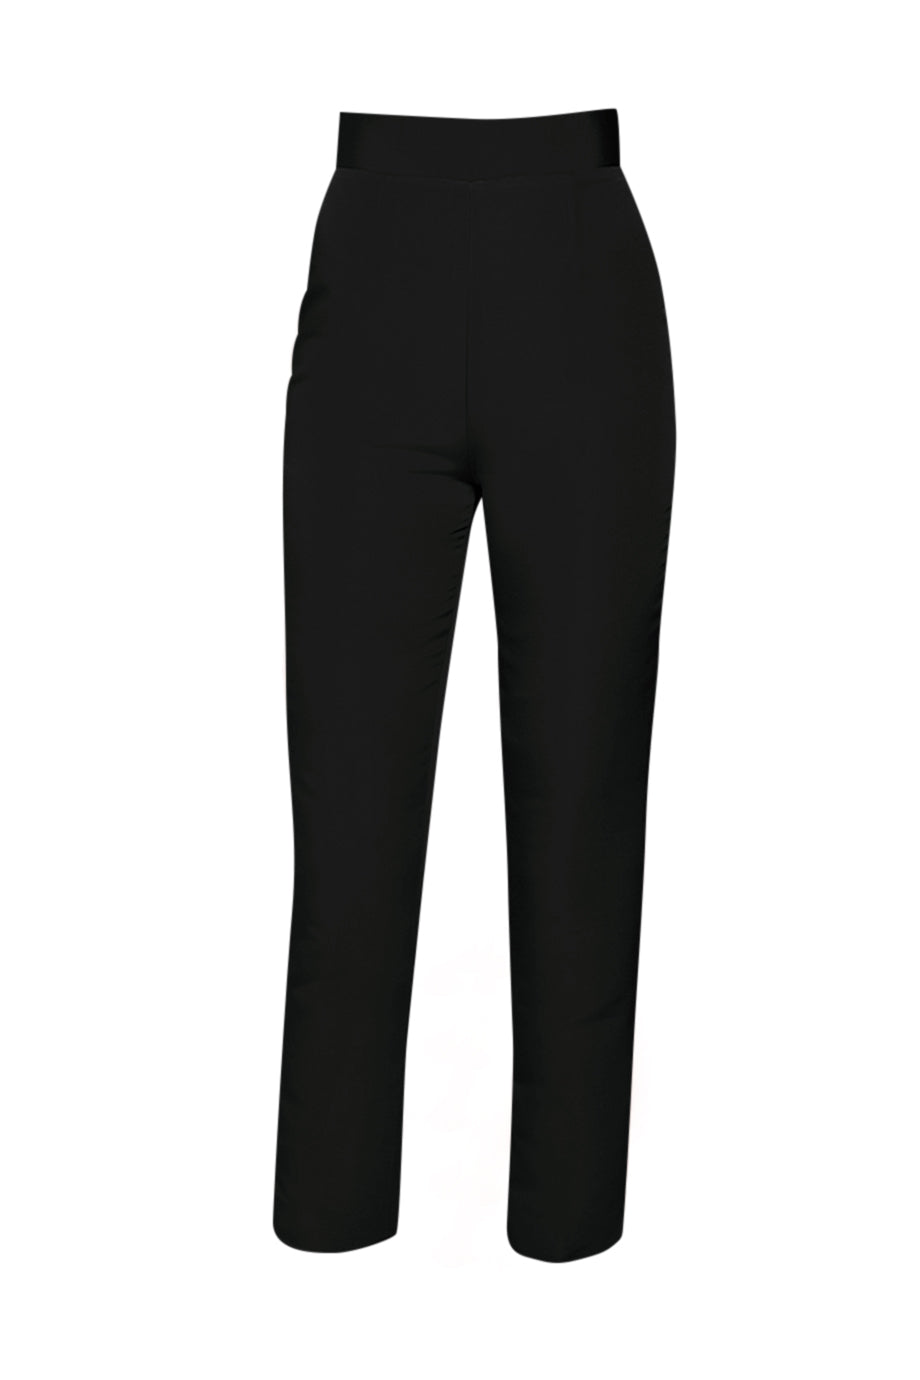 NEO NOIR Cigarette Pants — choose from 2 from 29,99 €